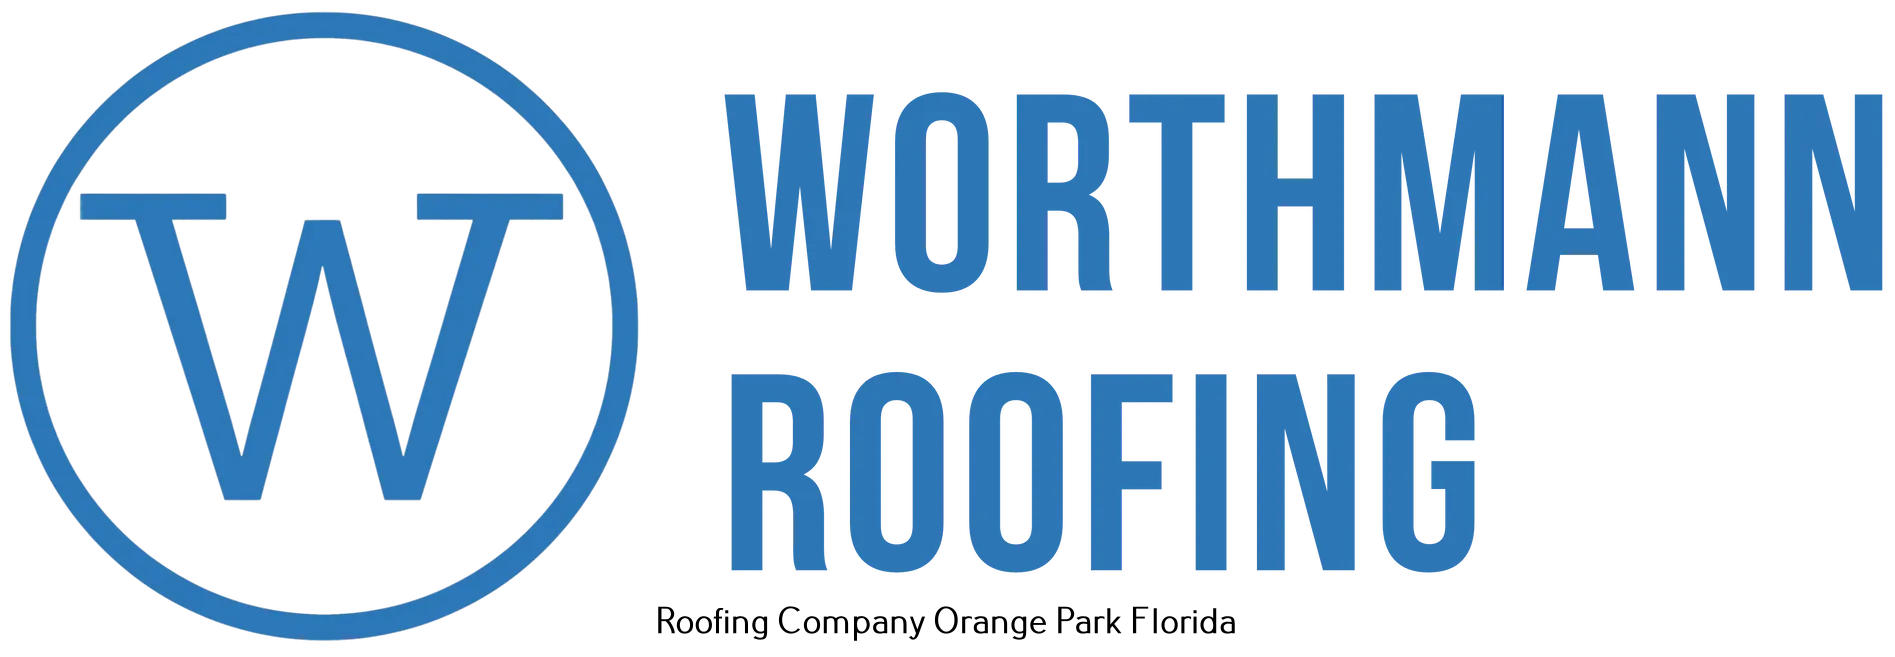 Worthmann Roofing Shares Tips for Homeowners on What to Look for During a Roof Inspection